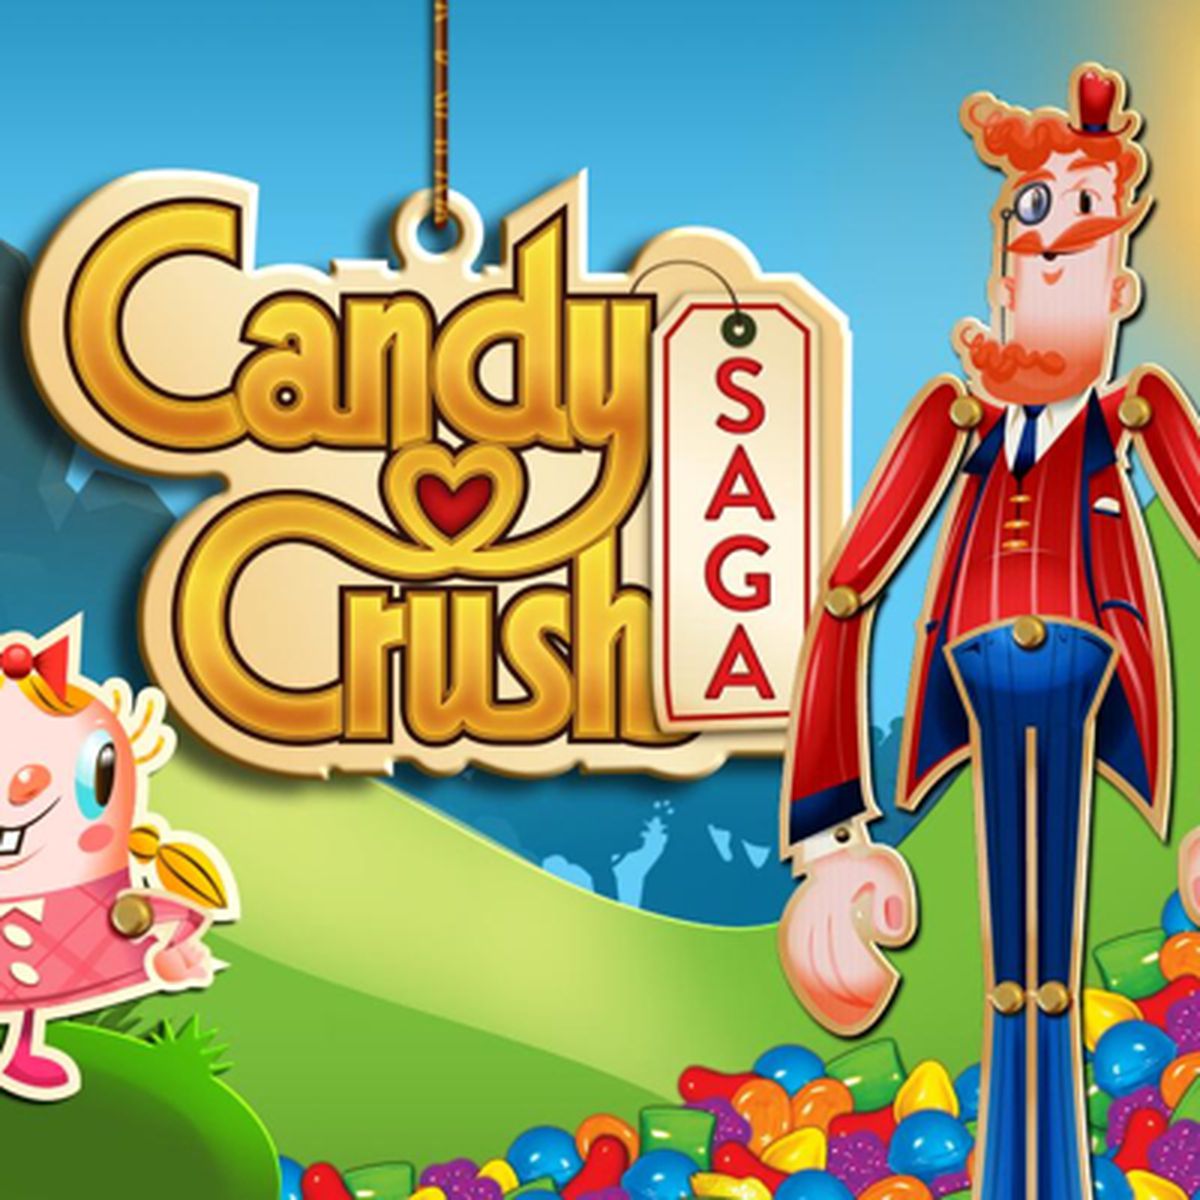 Candy Crush Saga Players Spent Over $1.3 Billion on In-App Purchases in  2014 - MacRumors